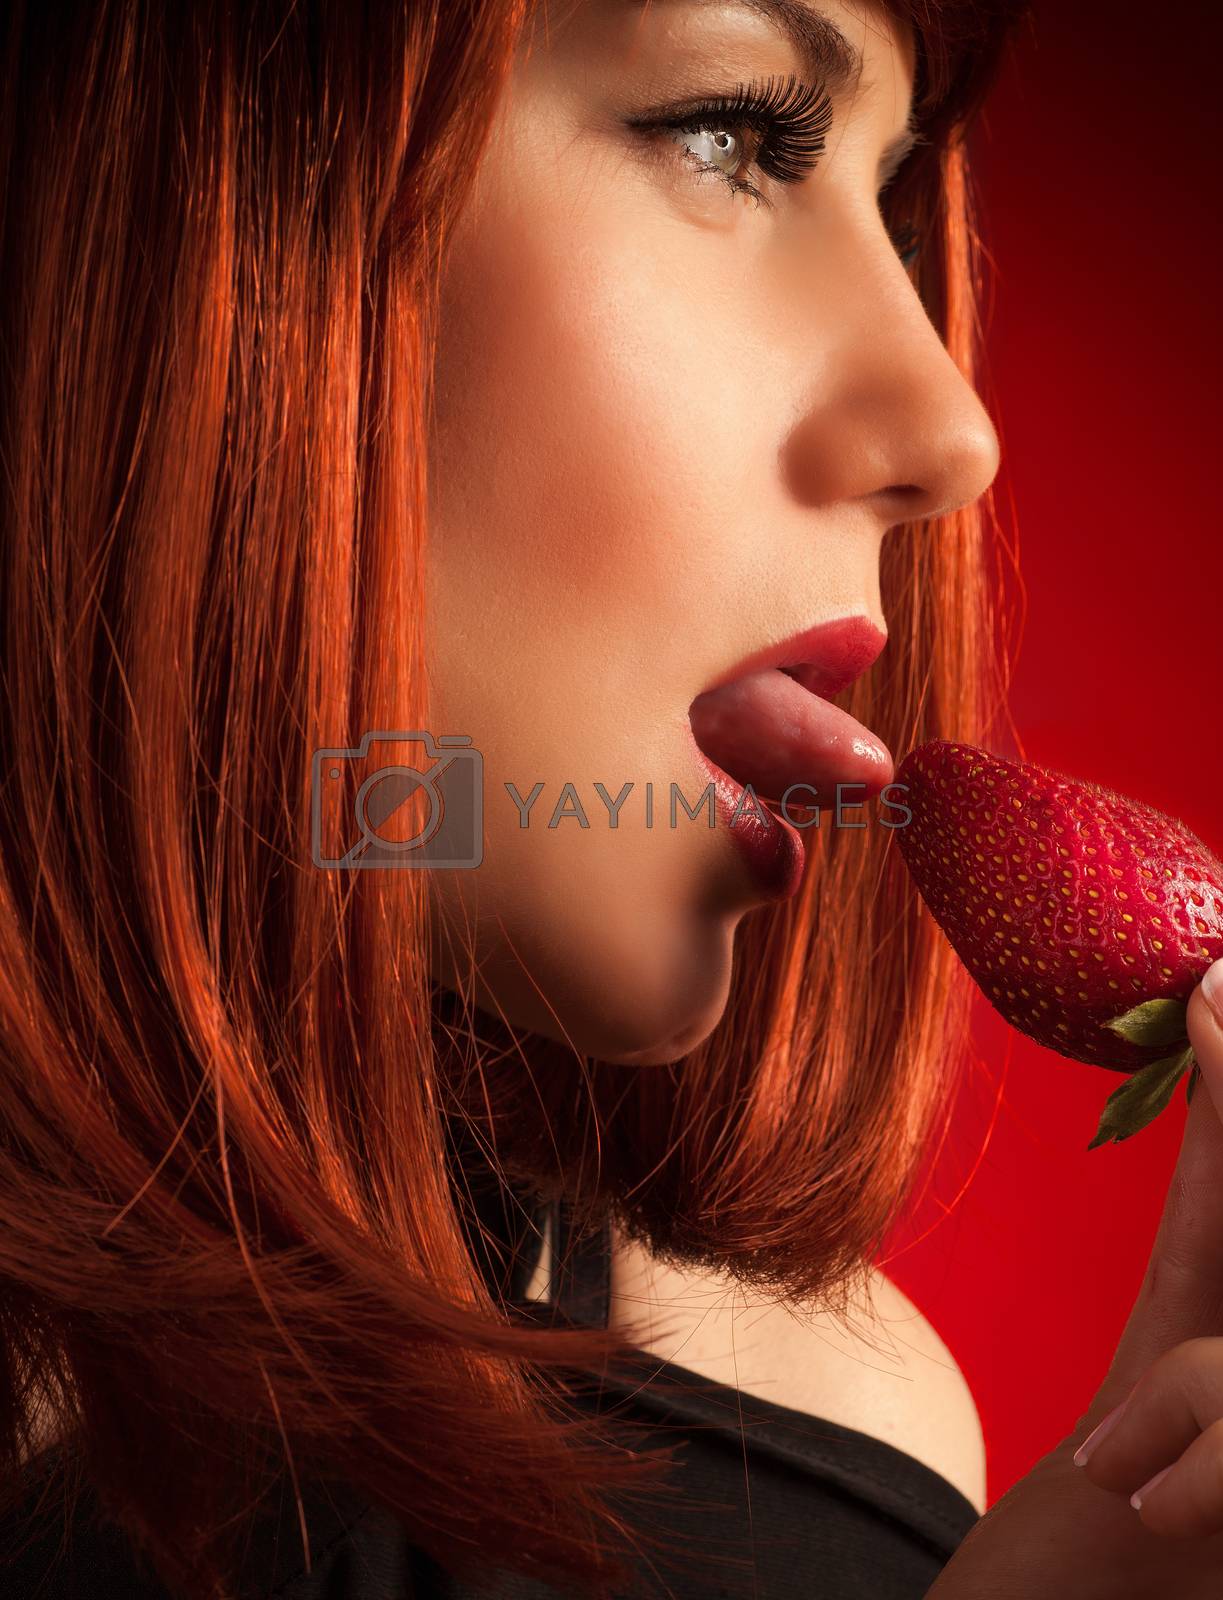 Royalty free image of Seductive woman eating strawberry by Anna_Omelchenko